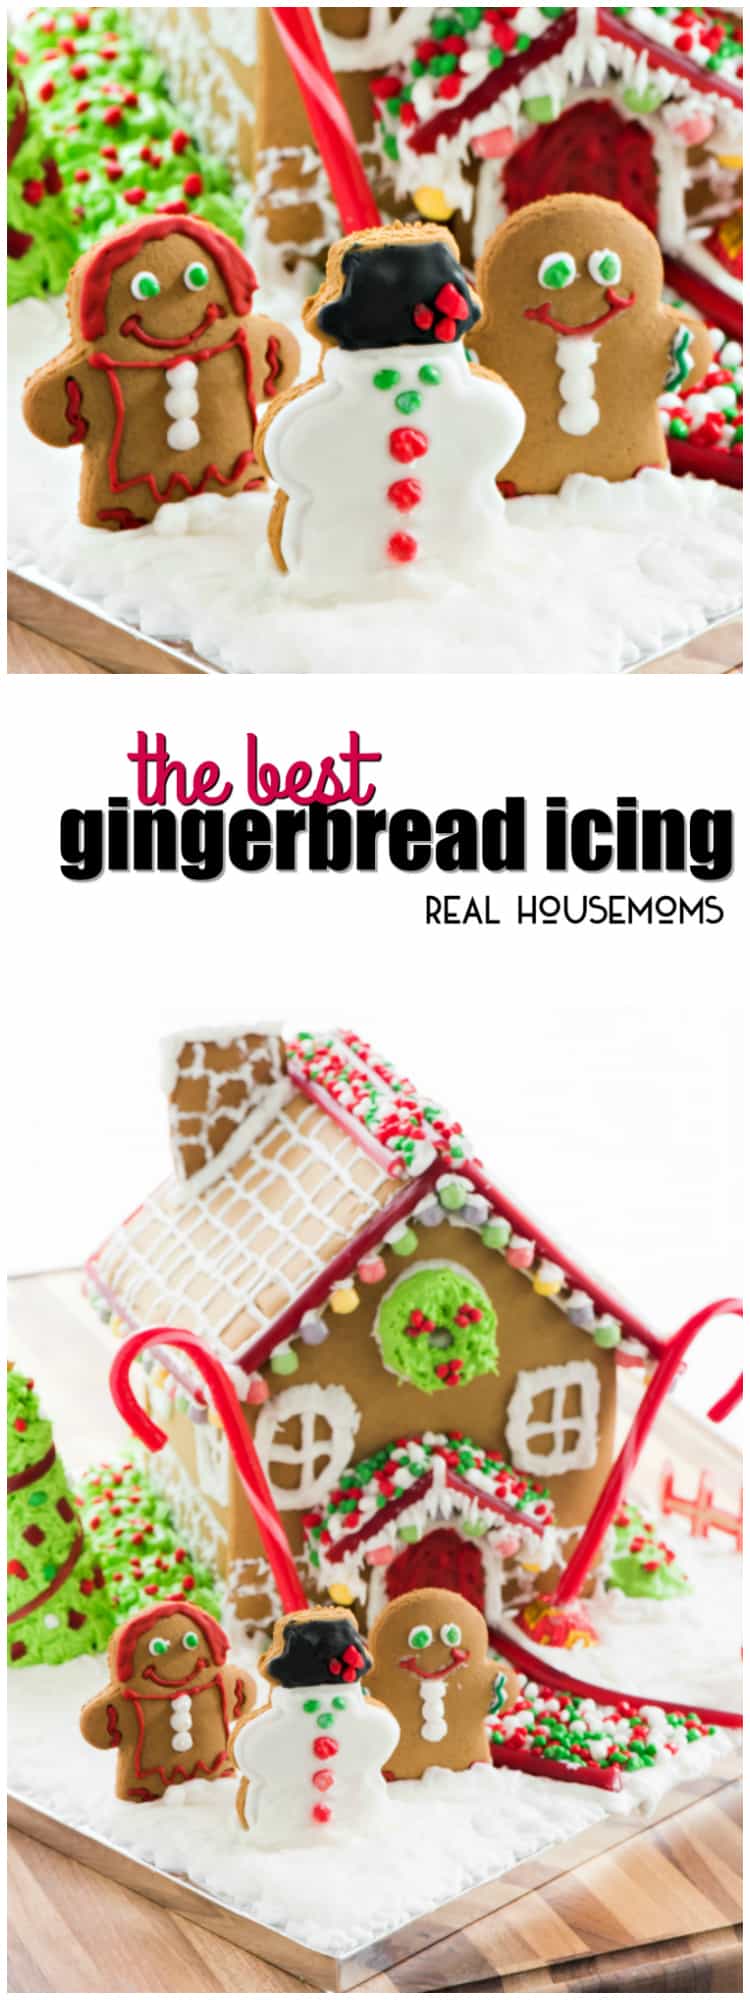 THIS IS THE BEST GINGERBREAD ICING! IT HELPS TO STICK EVERYTHING TOGETHER AND HOLDS IT JUST LIKE GLUE! YOU’LL MAKE THE PRETTIEST GINGERBREAD HOUSES WITH THIS GLUE IN YOUR HAND!